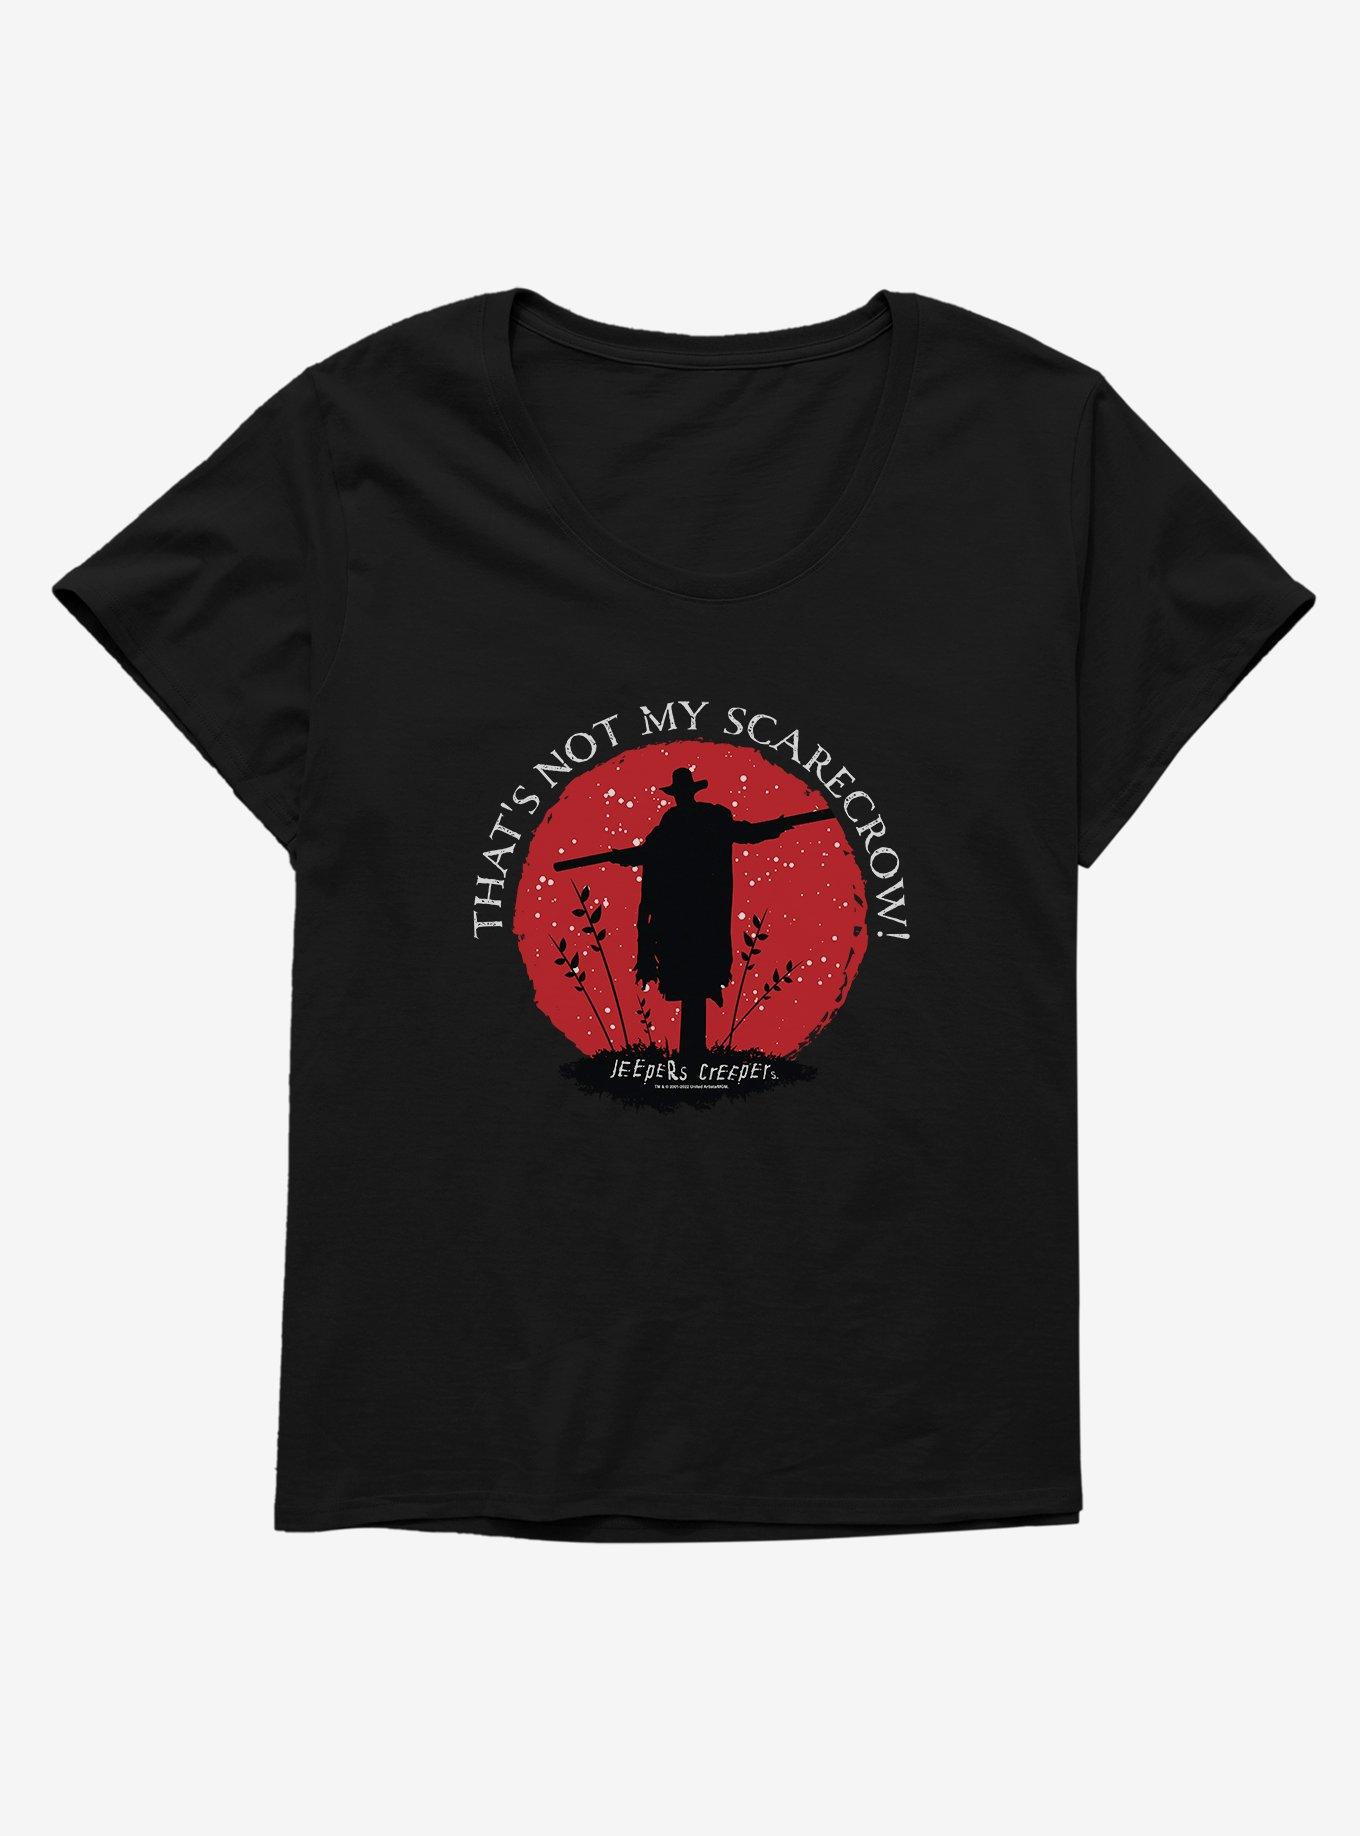 Jeepers Creepers Scarecrow Girls T-Shirt Plus Size, BLACK, hi-res